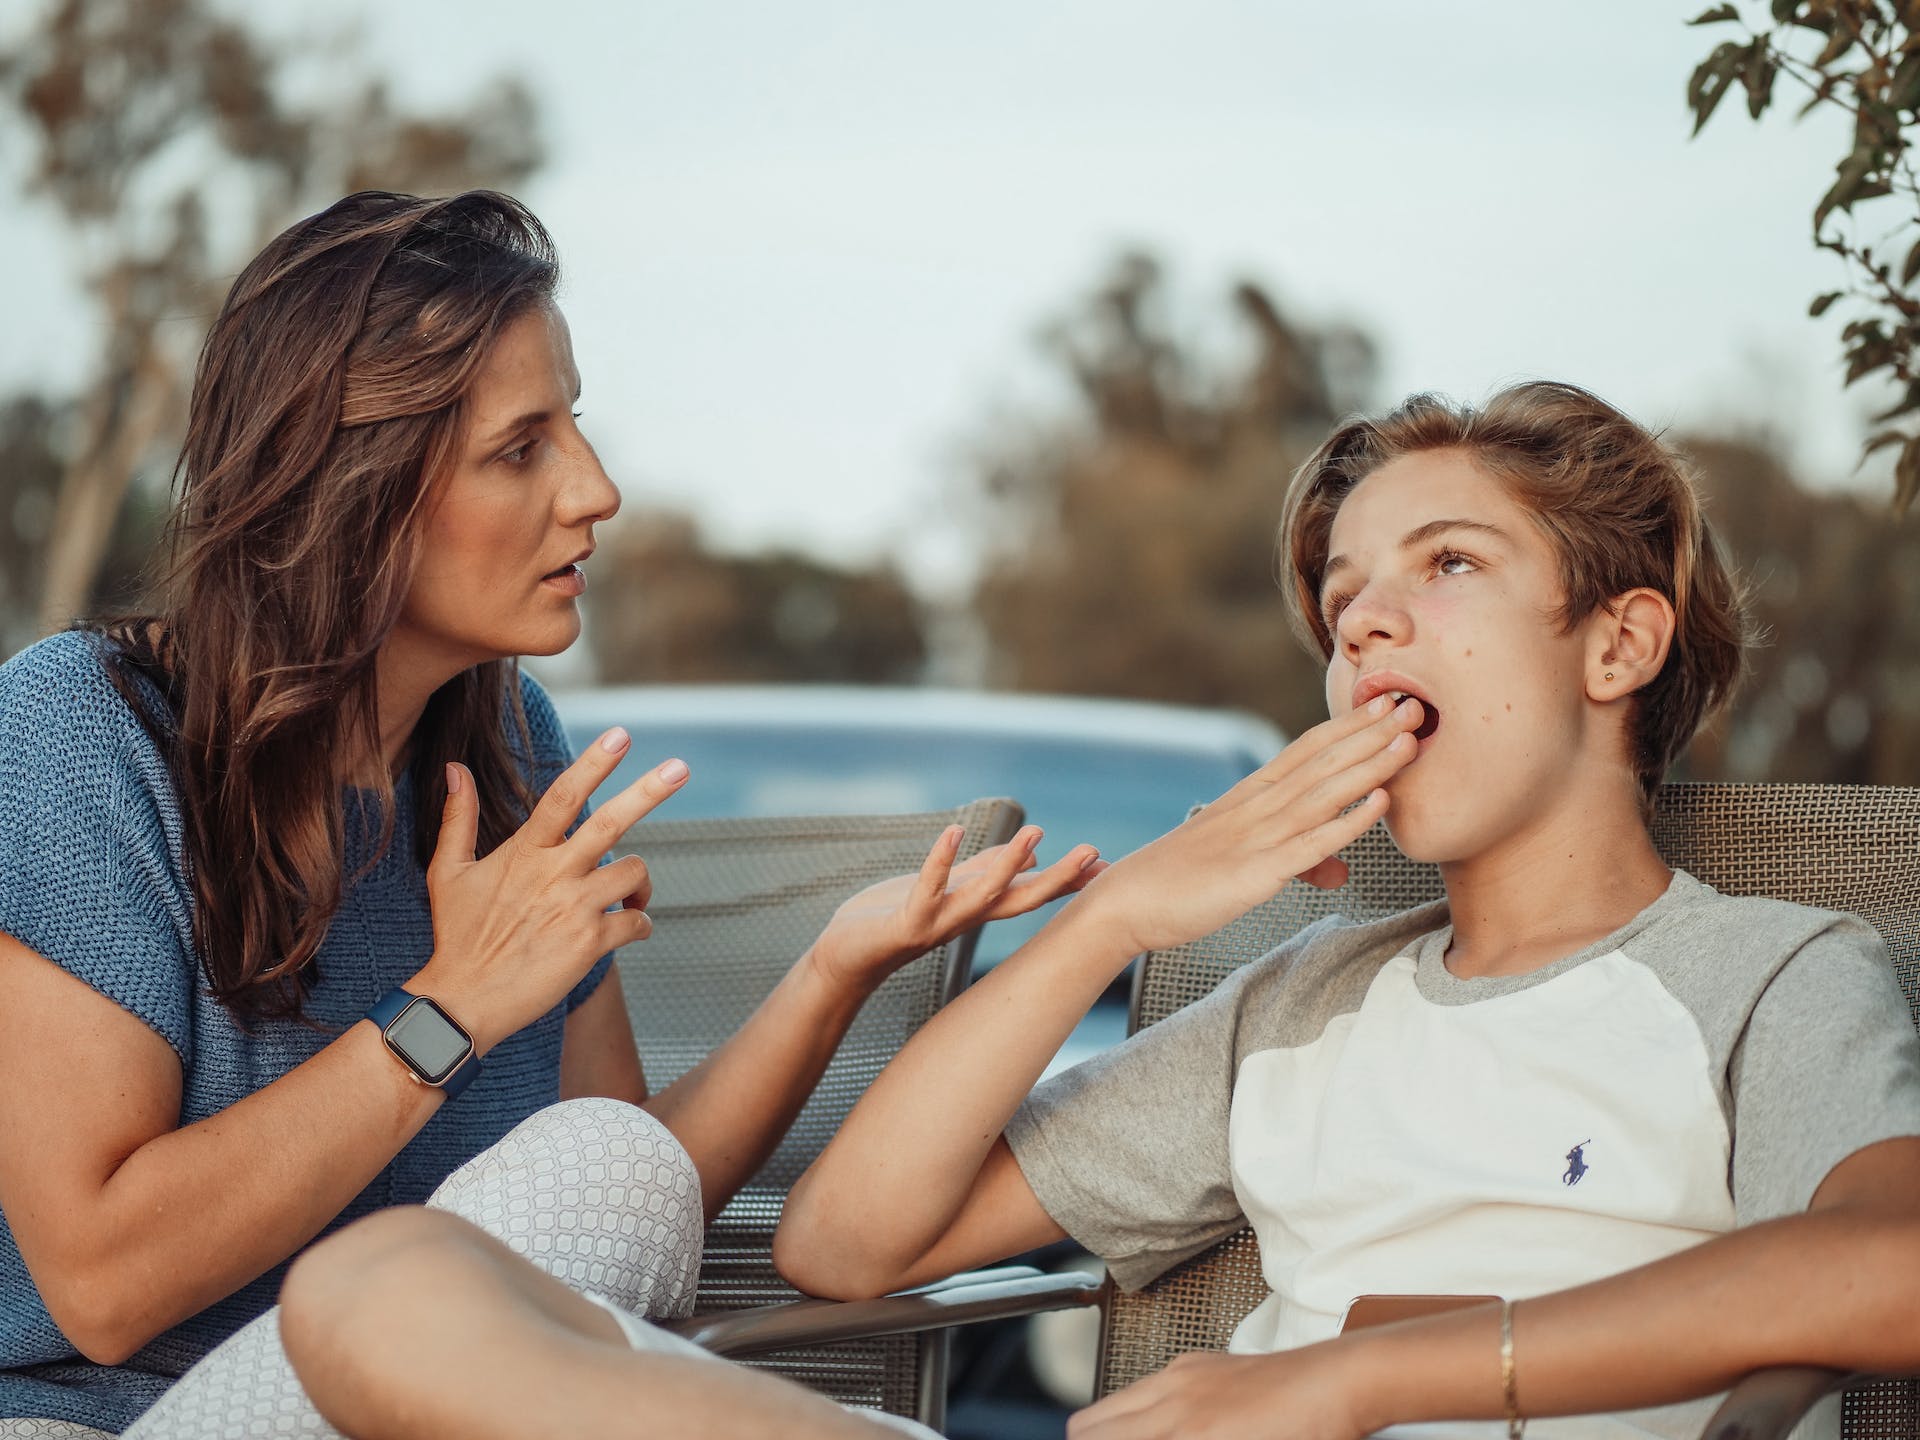 Mother scolding her young son | Source: Pexels